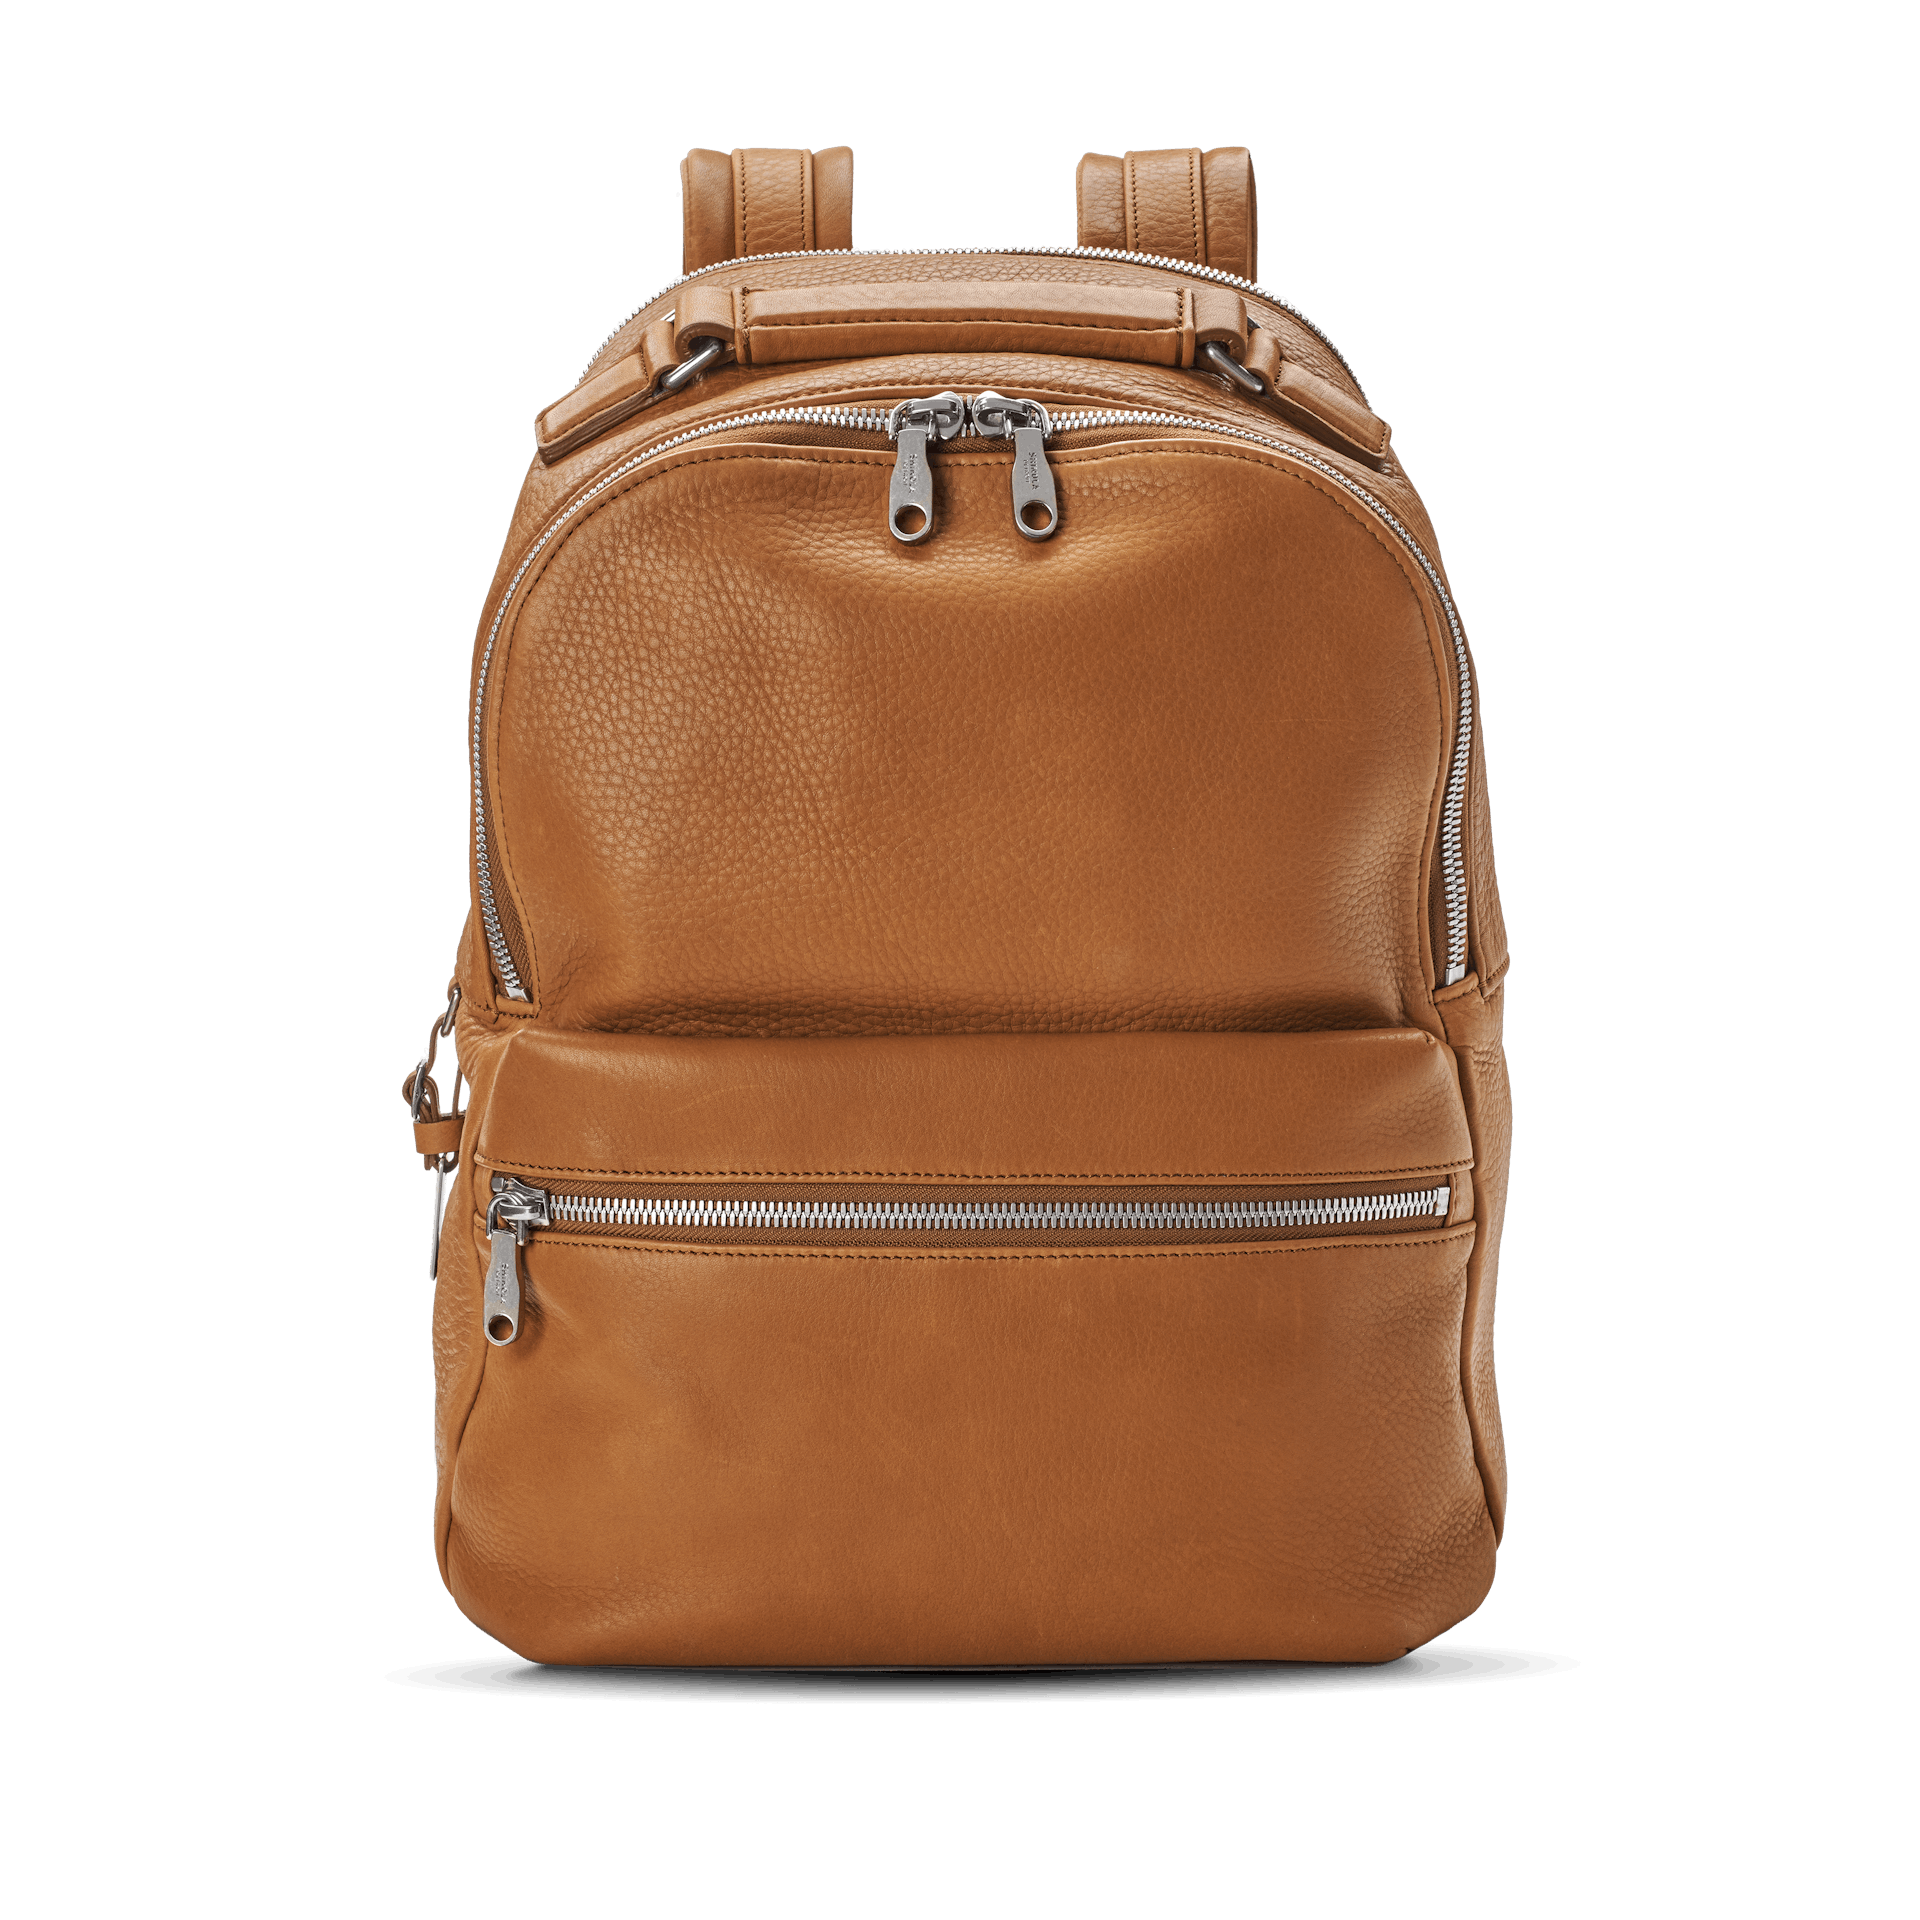 Women's Leather Backpack | Small Quality Full Grain Purse | Love 41